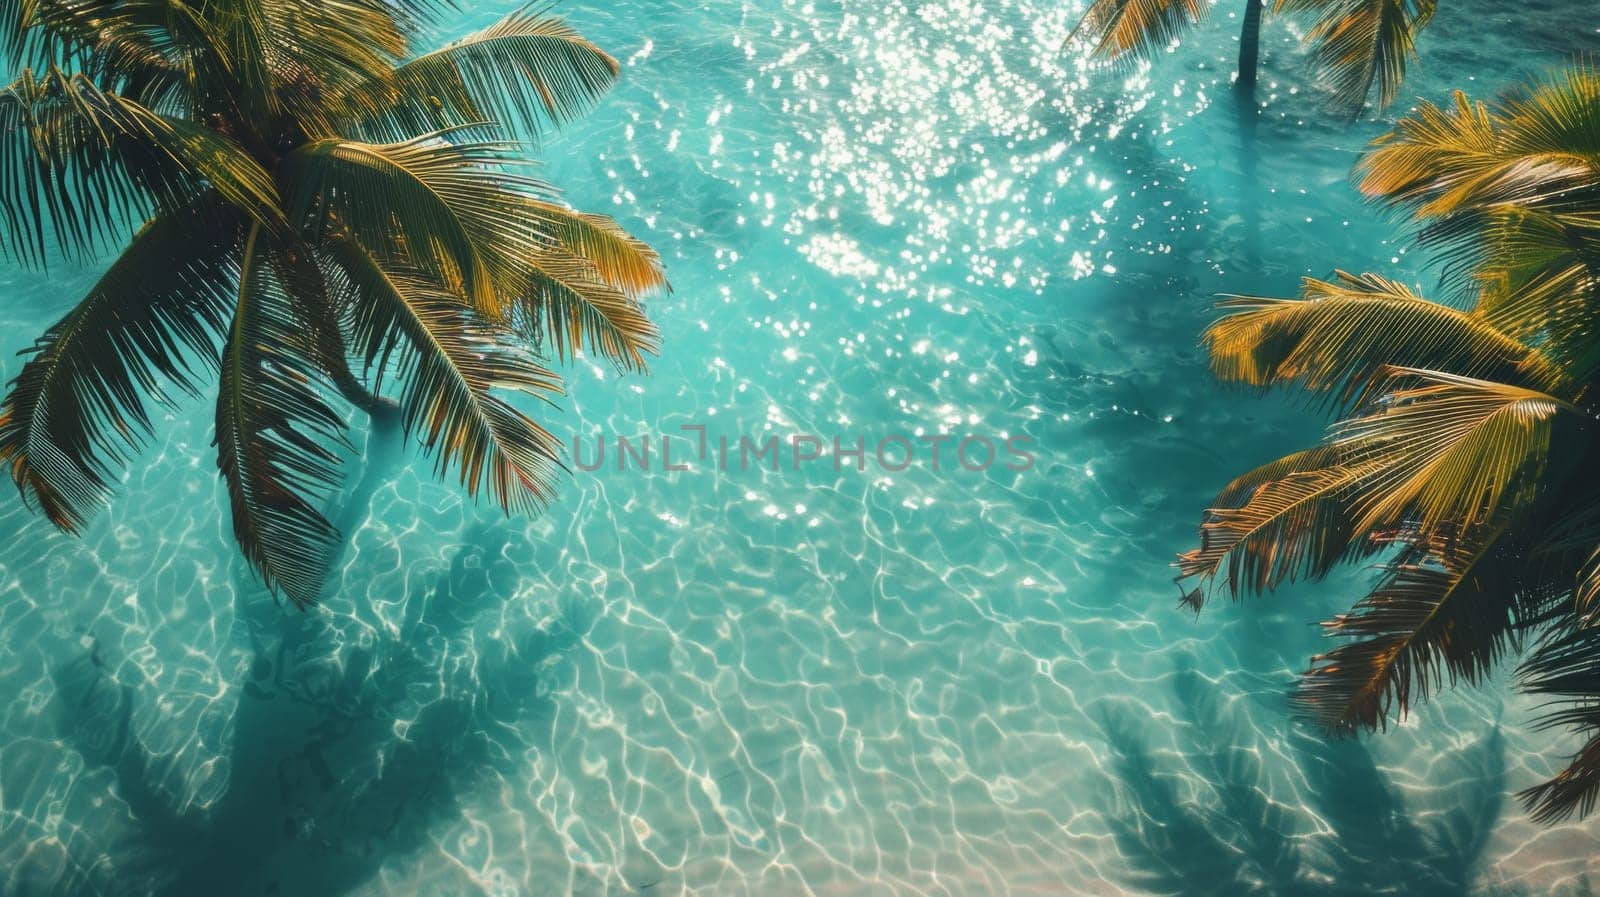 A view of a couple palm trees in the water next to some blue ocean